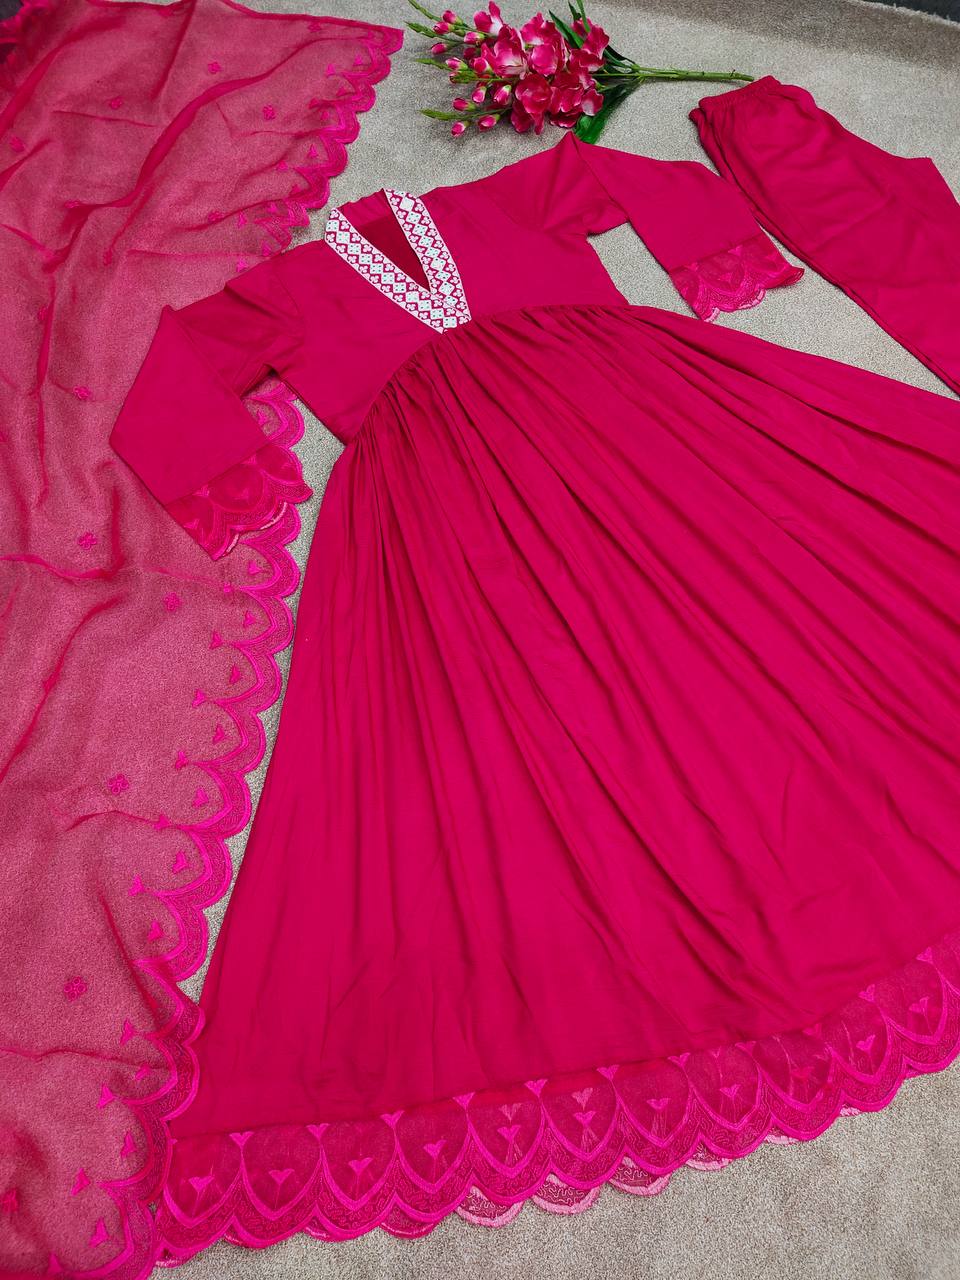 Rani Pink Anarkali Suit In Maska Cotton Silk With Embroidery Work